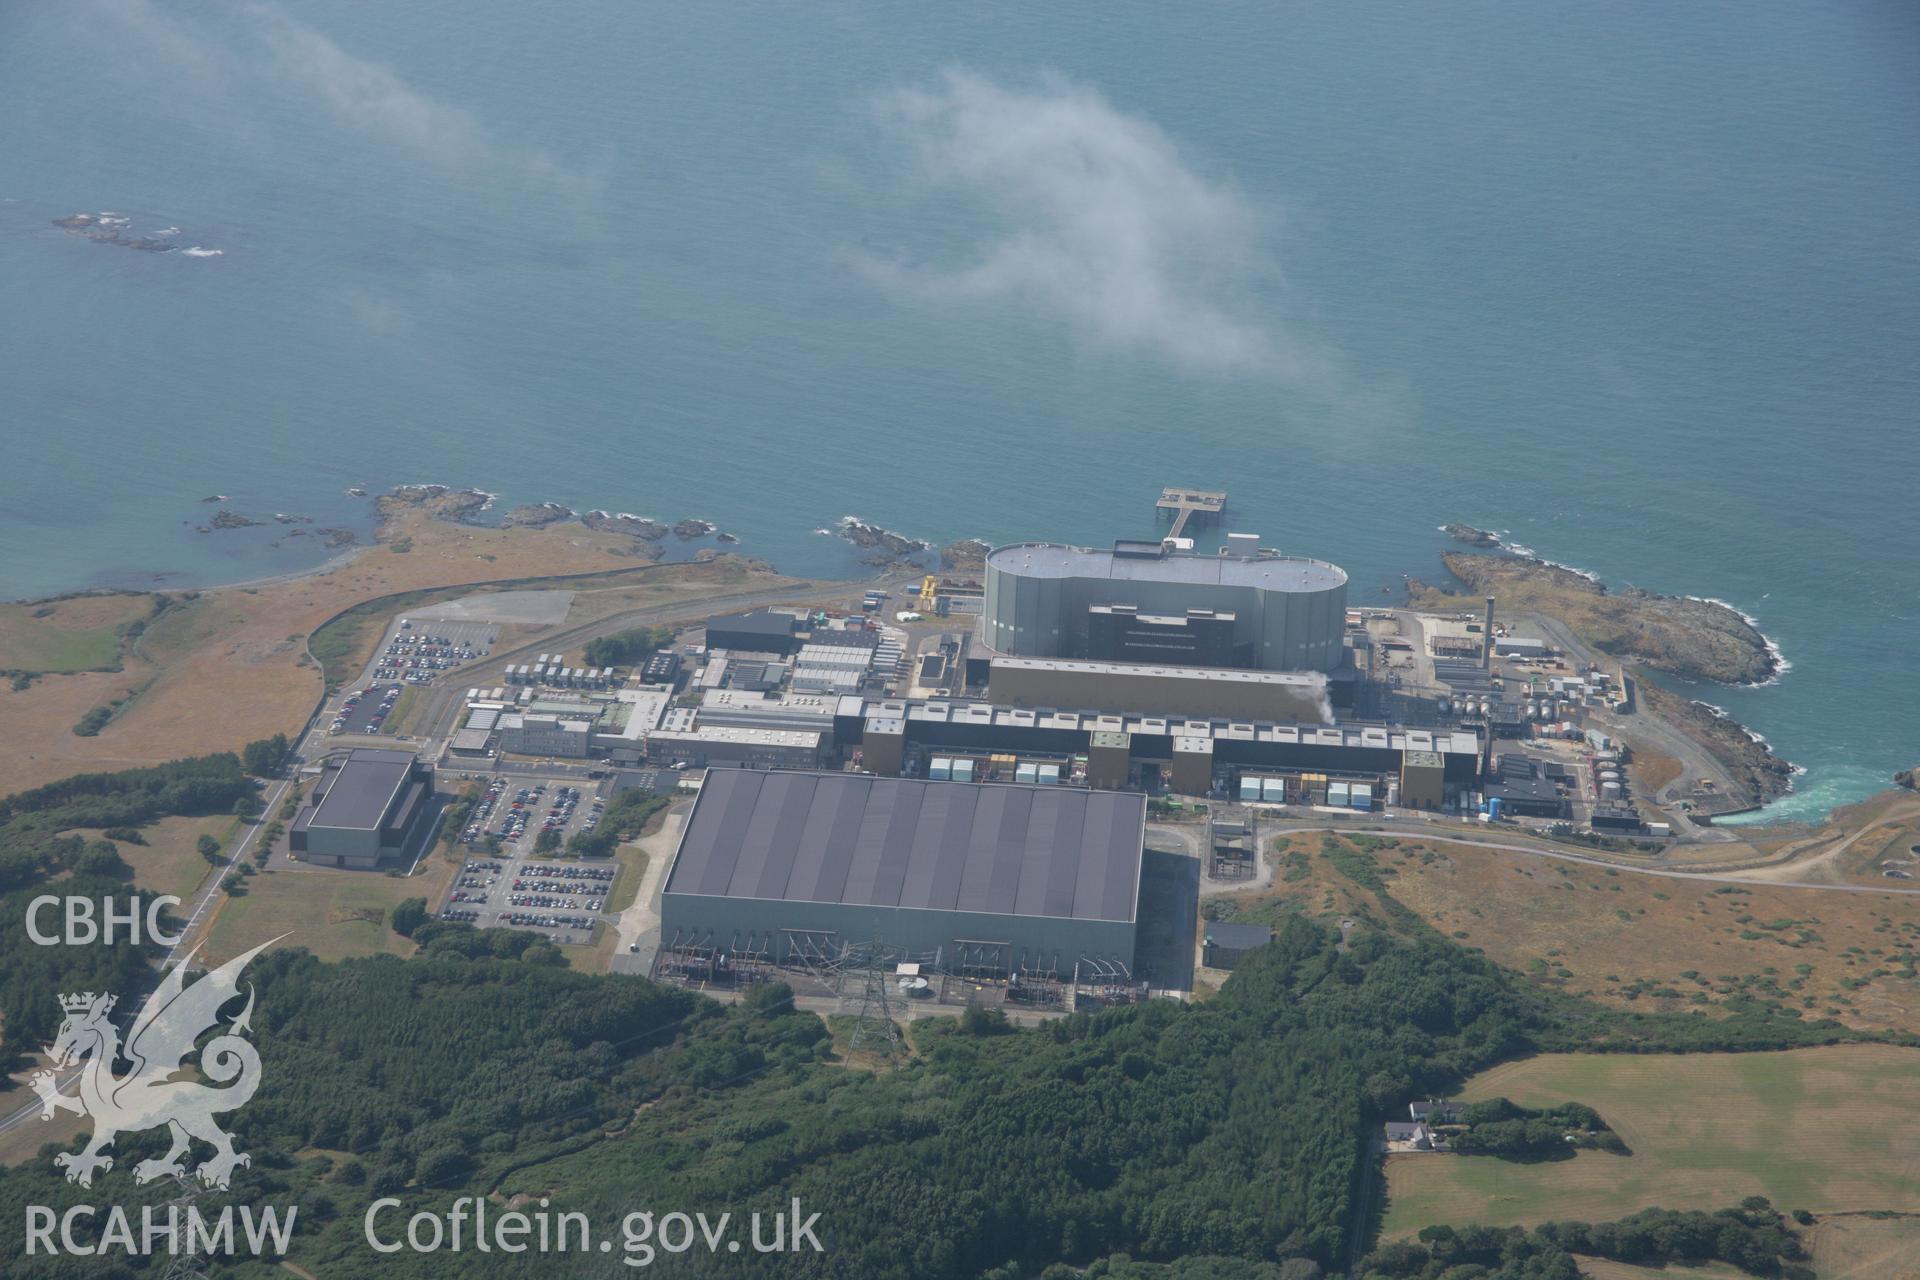 RCAHMW colour oblique aerial photograph of Wylfa Nuclear Power Station. Taken on 14 August 2006 by Toby Driver.